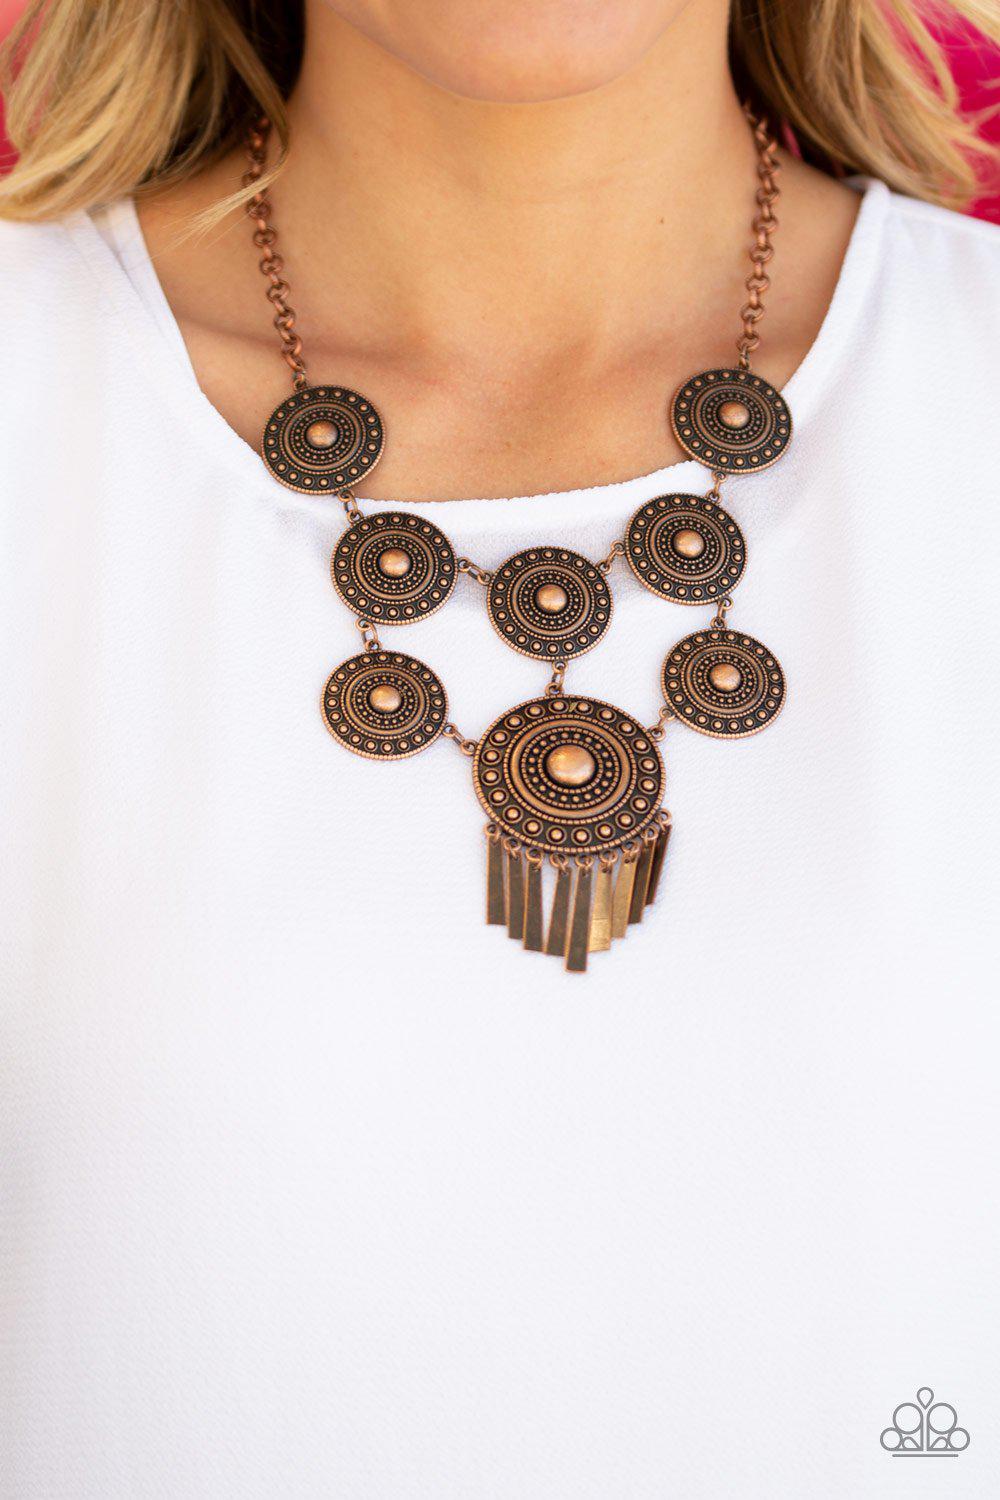 Modern Medalist Copper Necklace - Paparazzi Accessories- lightbox - CarasShop.com - $5 Jewelry by Cara Jewels